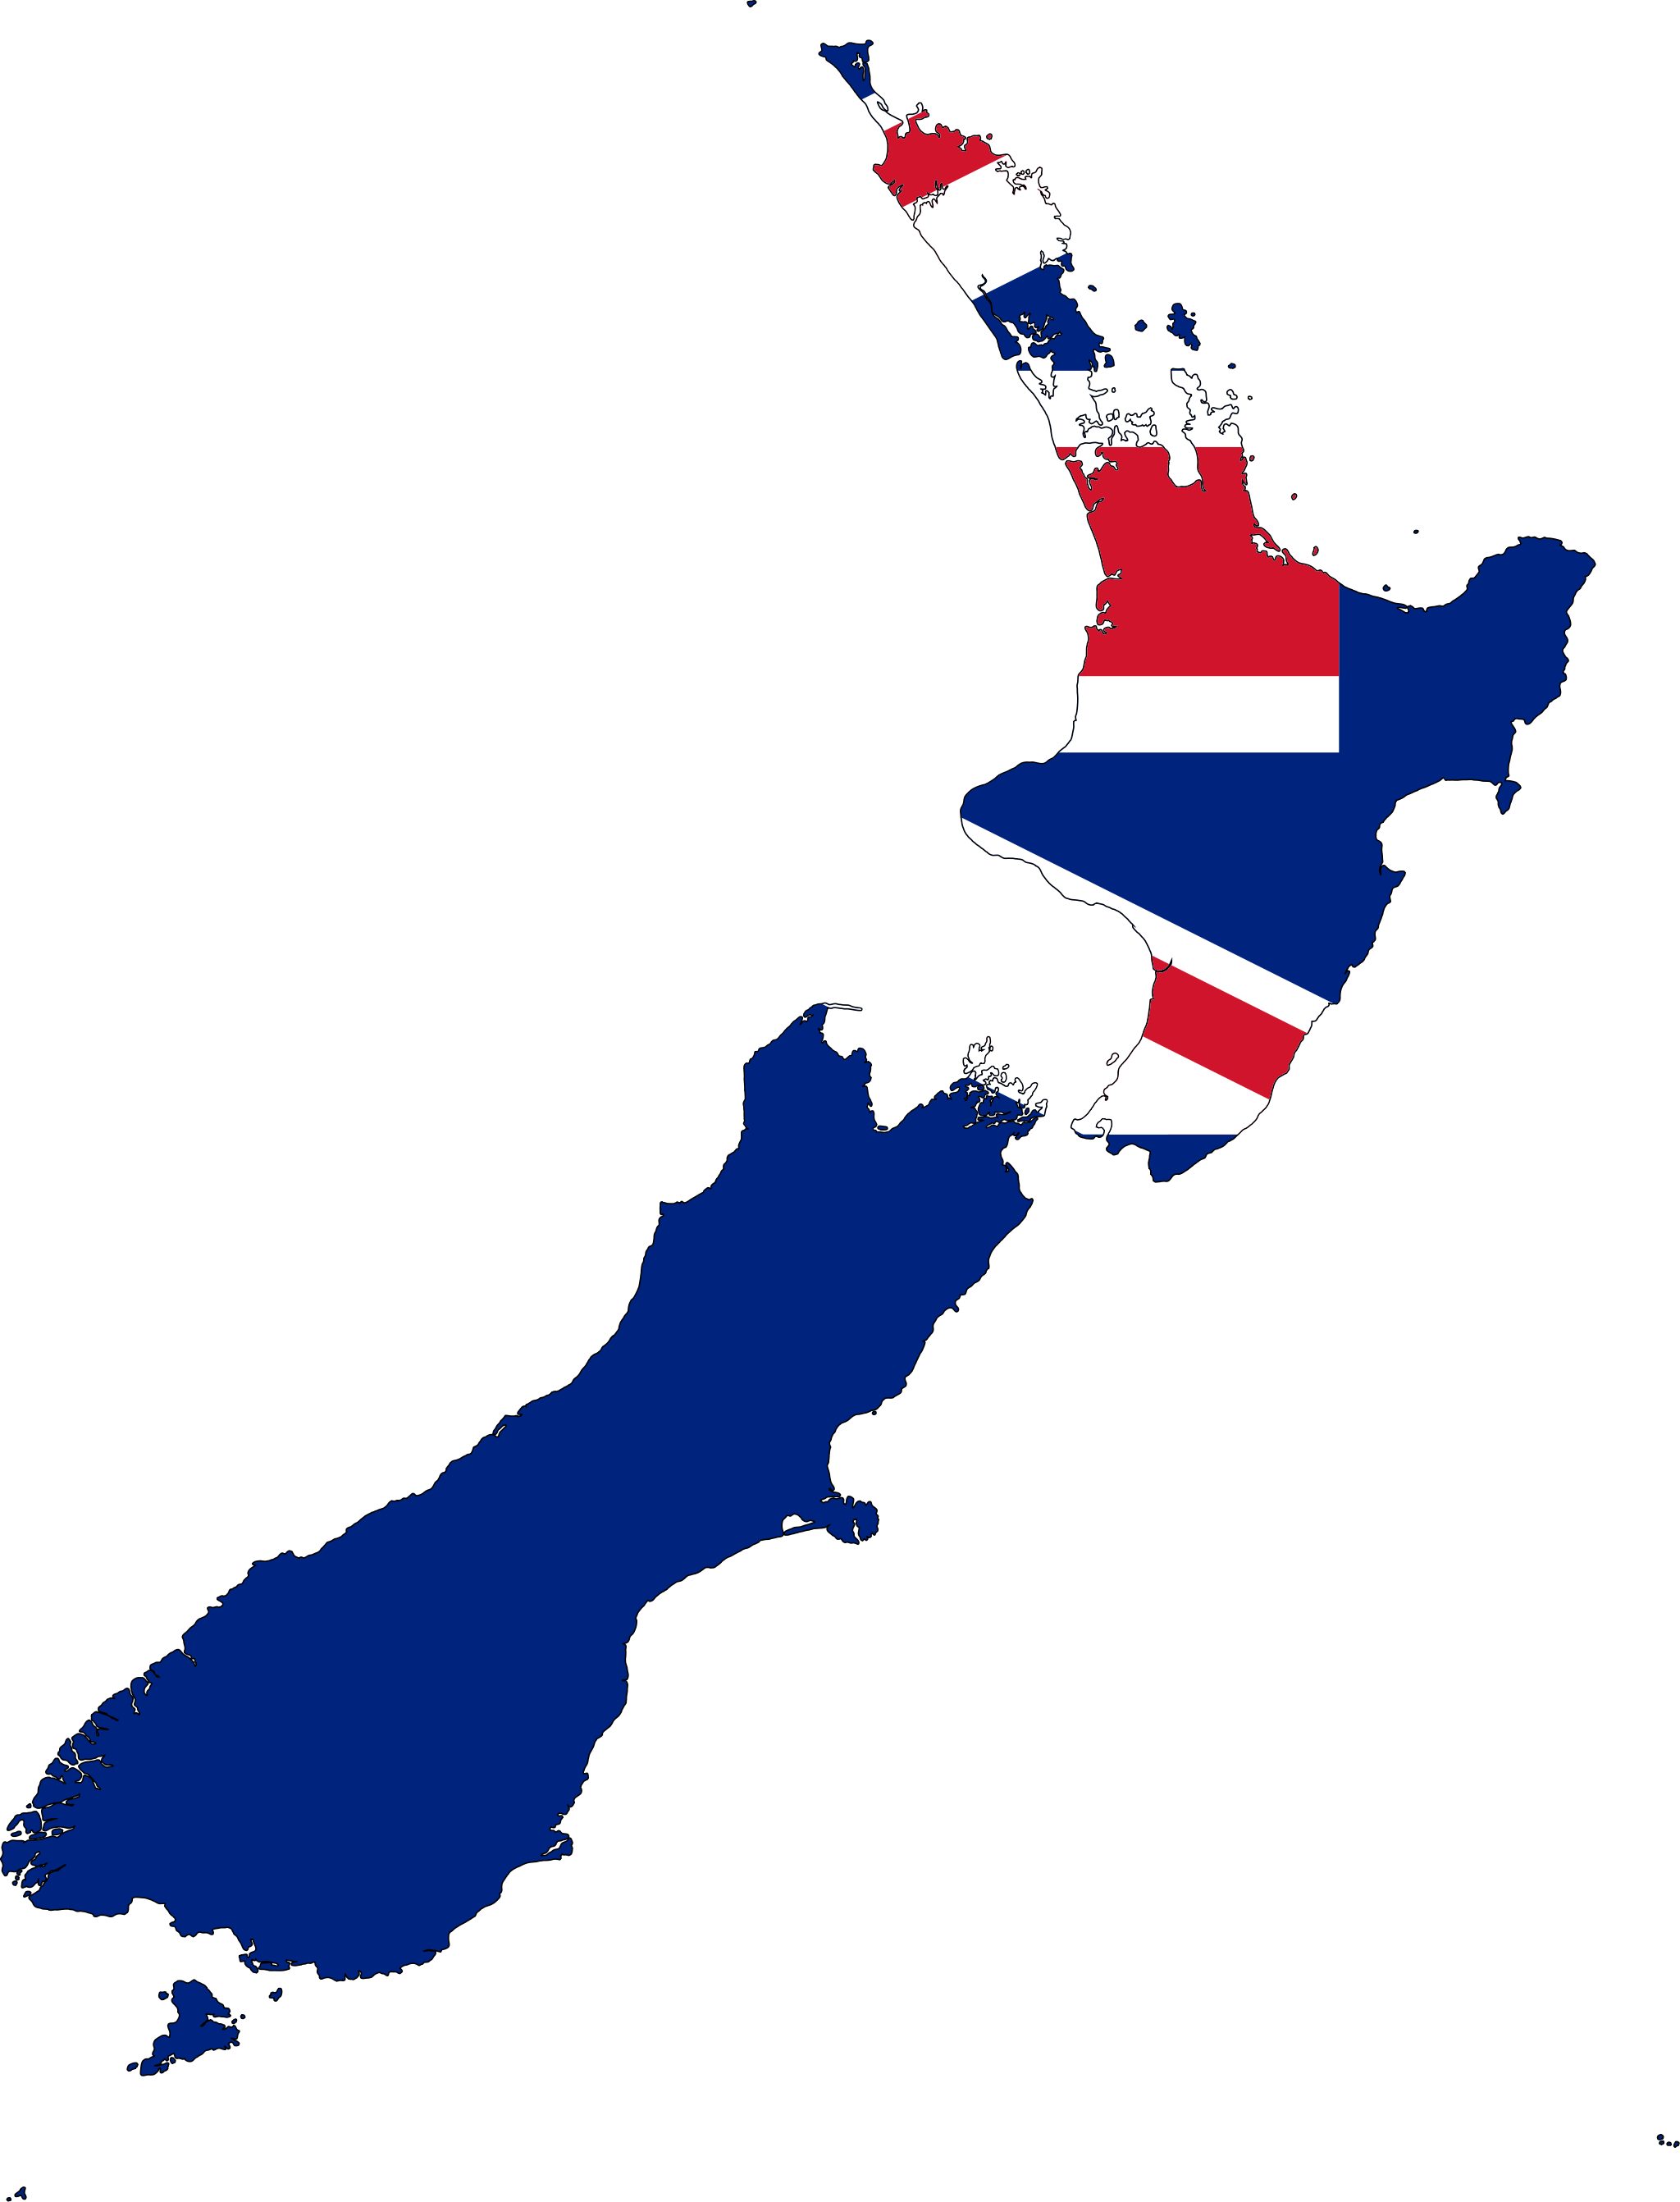 New Zealand PNG - 13207